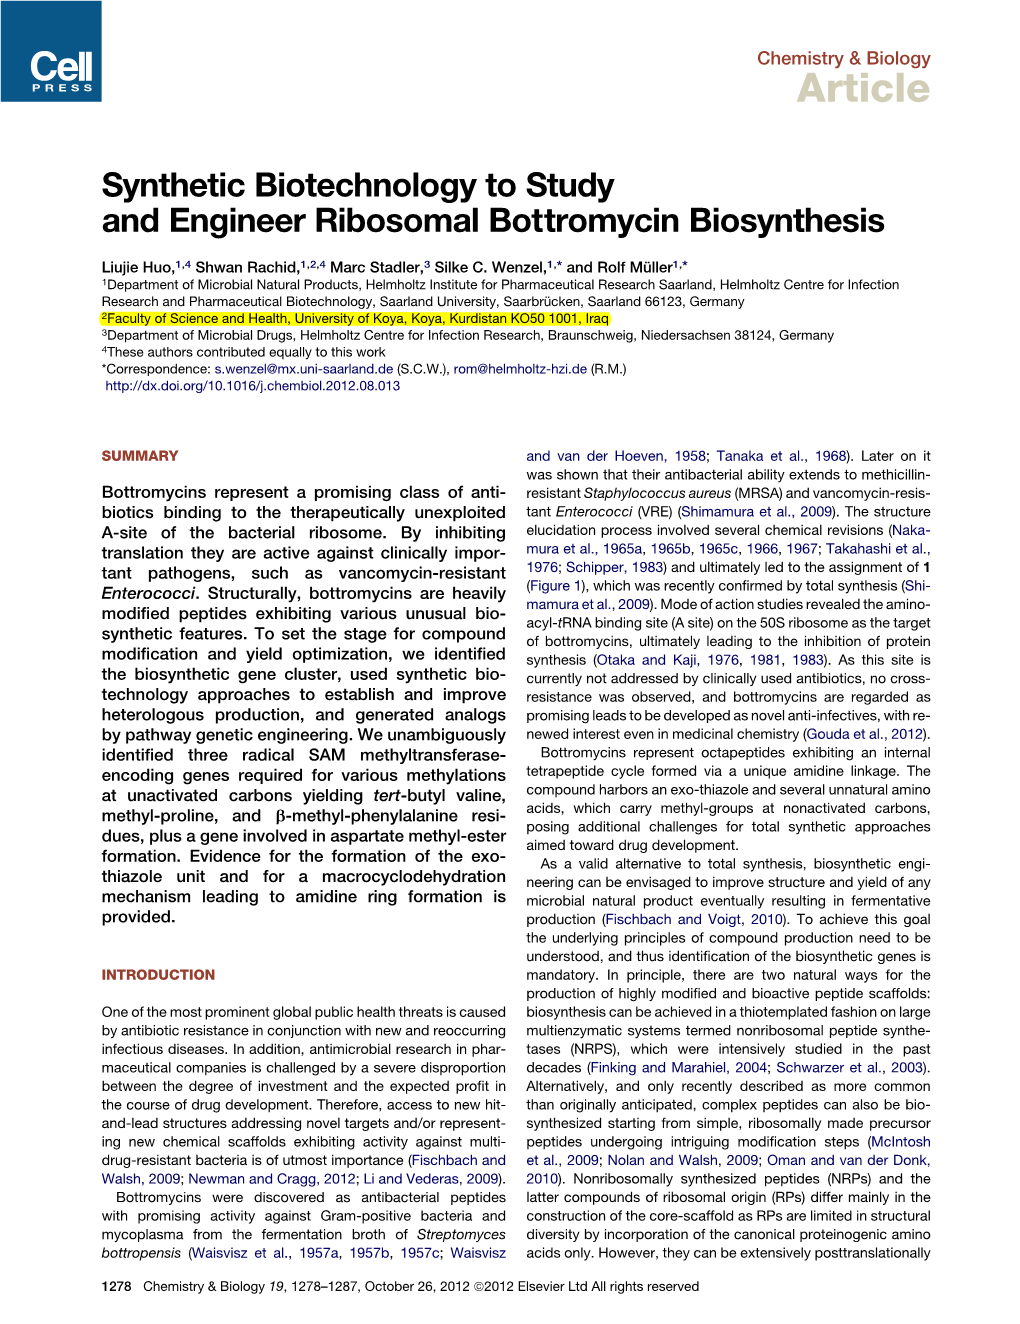 Synthetic Biotechnology to Study and Engineer Ribosomal Bottromycin Biosynthesis